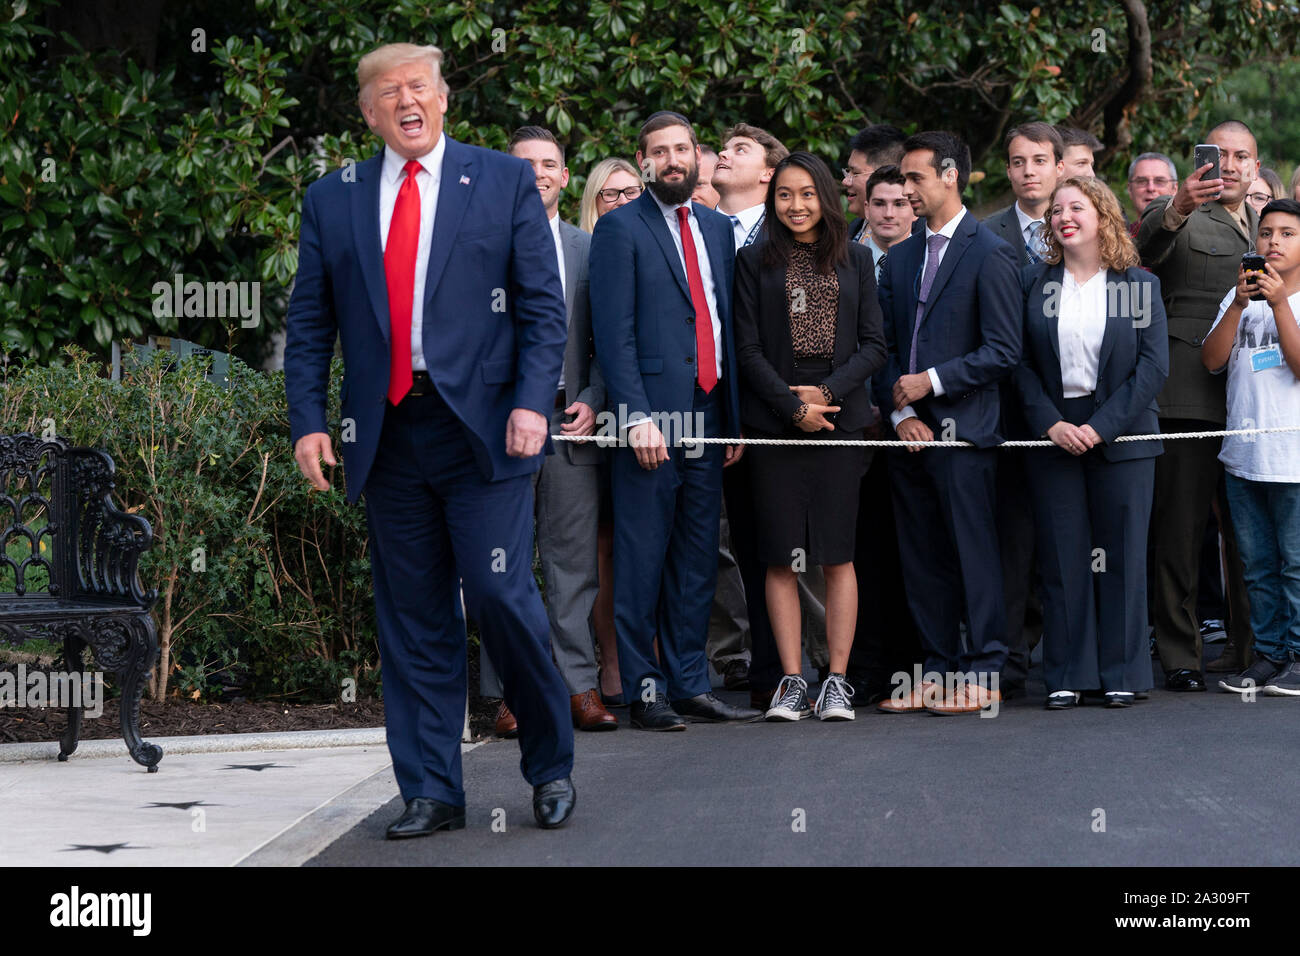 United States President Donald J. Trump returns to the White House in Washington, DC after signing an executive order in The Villages, Florida 'Protecting and Improving Medicare' for senior citizens on Thursday, October 3, 2019.Credit: Chris Kleponis/Pool via CNP /MediaPunch Stock Photo